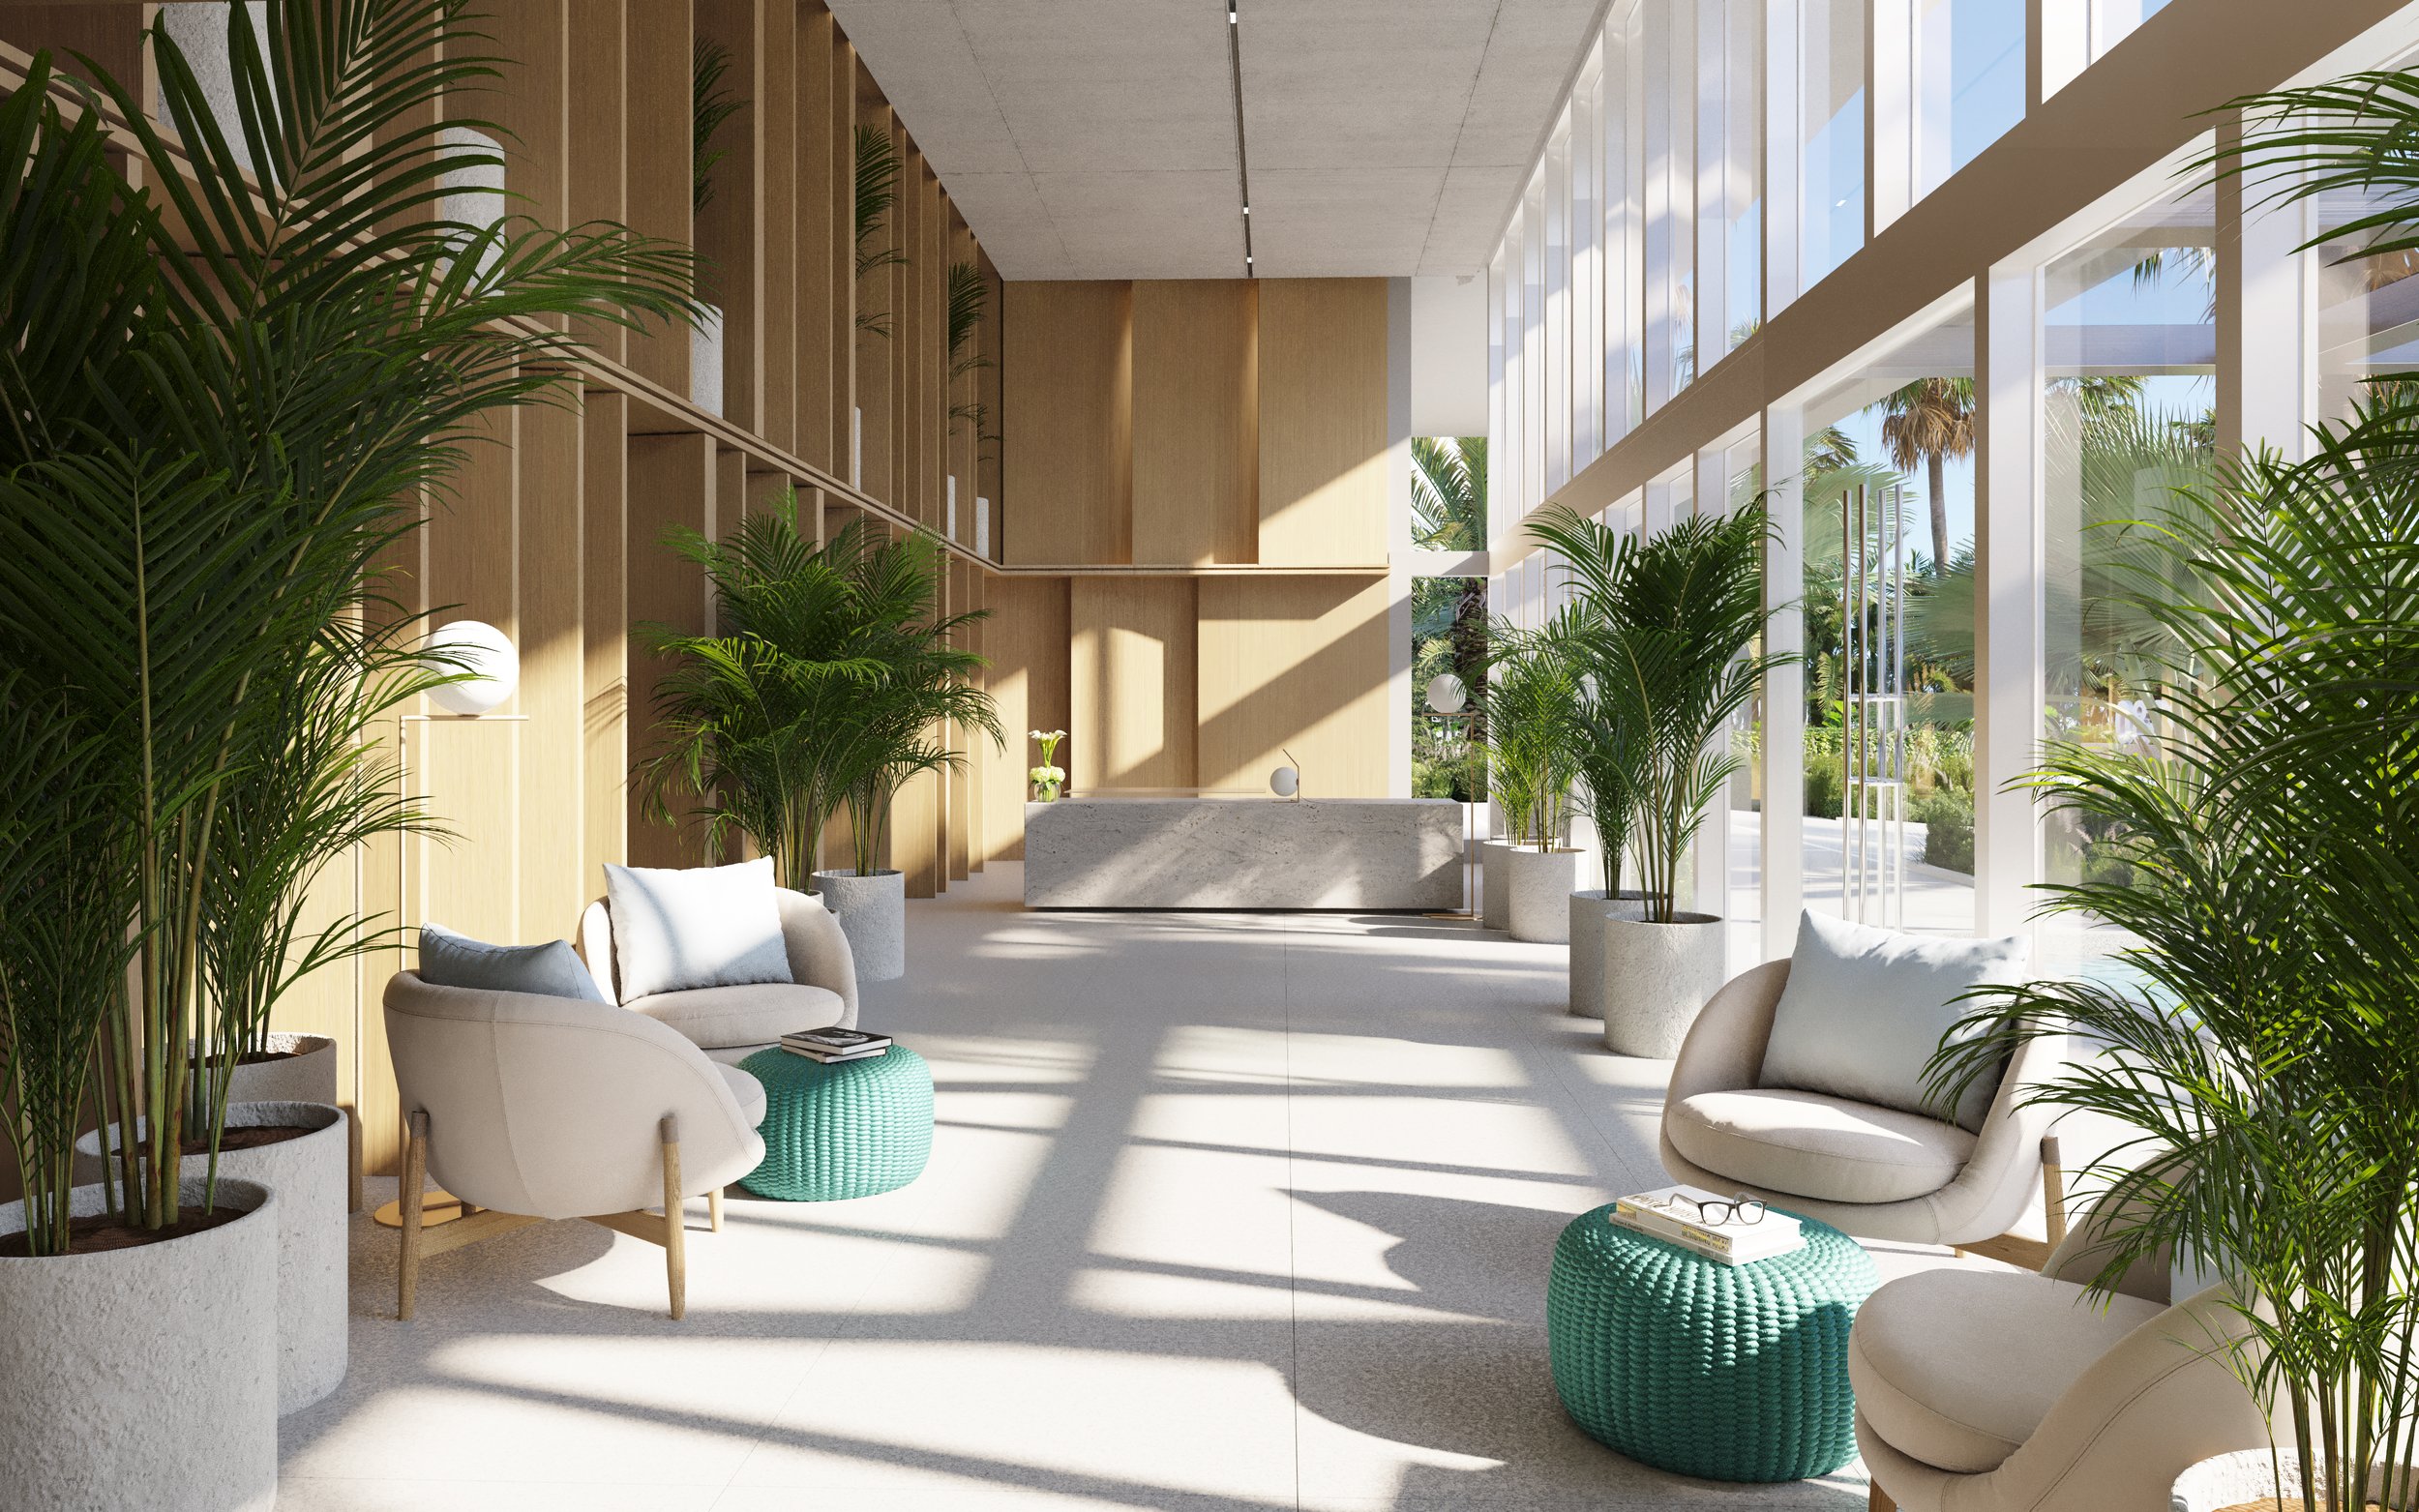 New York-Based Developer The Horizon Group Launches Sales For 9900 West Condominium On The Bay Harbor Islands 6.jpg